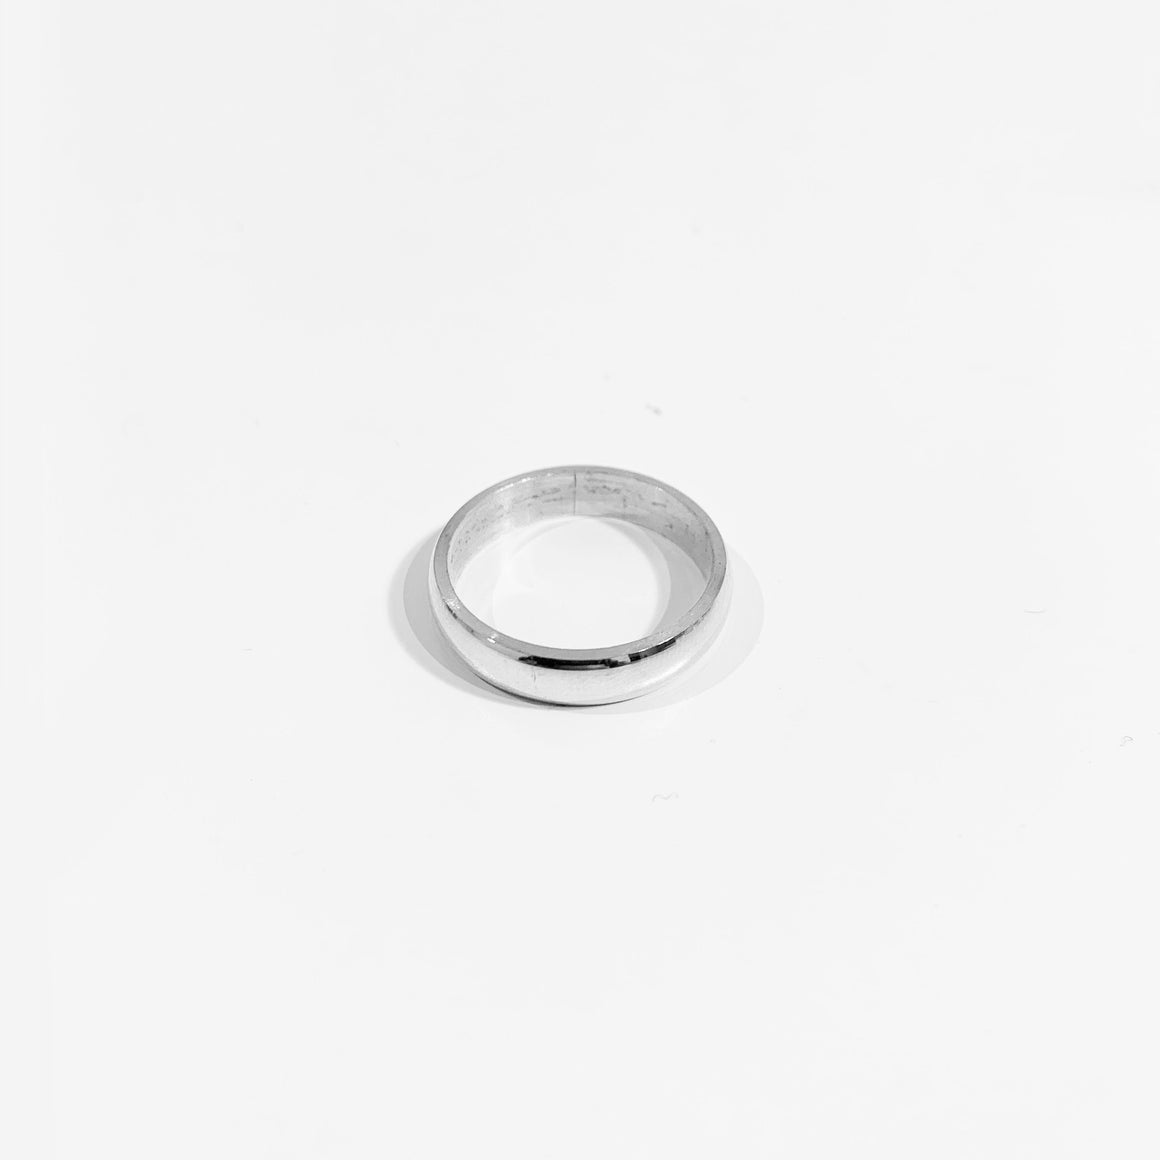 54 FLORAL 4mm BAND SIGNET RING - SILVER